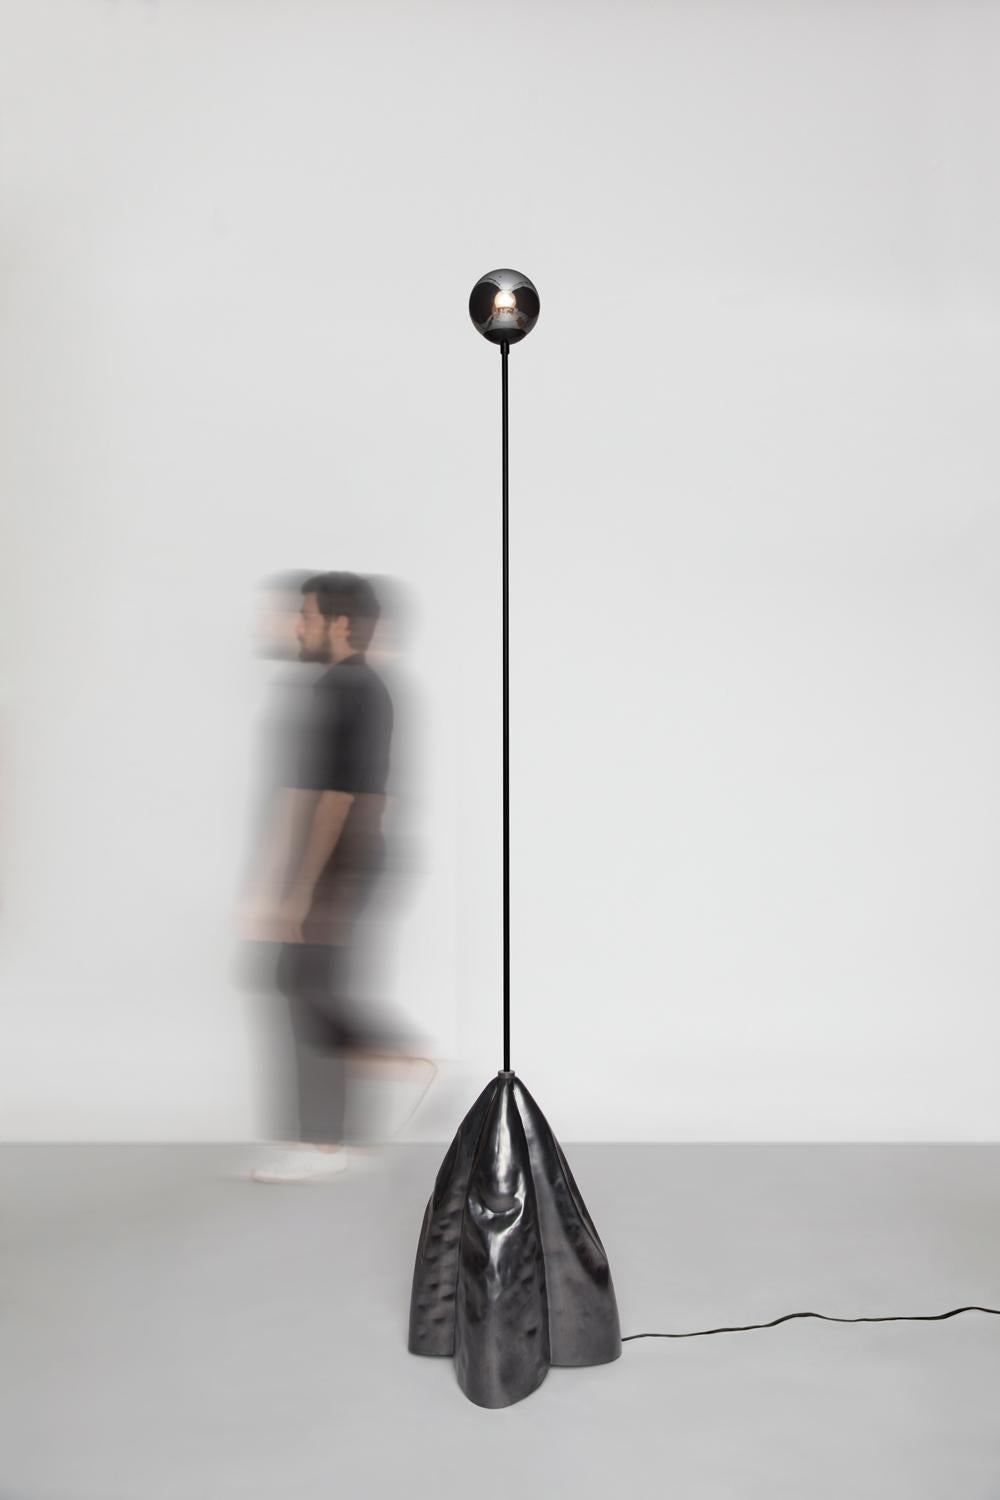 Overlay & underlay is a collection of lights born from a collaboration with clothes maker, kallol datta. The collaboration explores different approaches to light design, that blend the traditional and the experimental, form and function, detail and